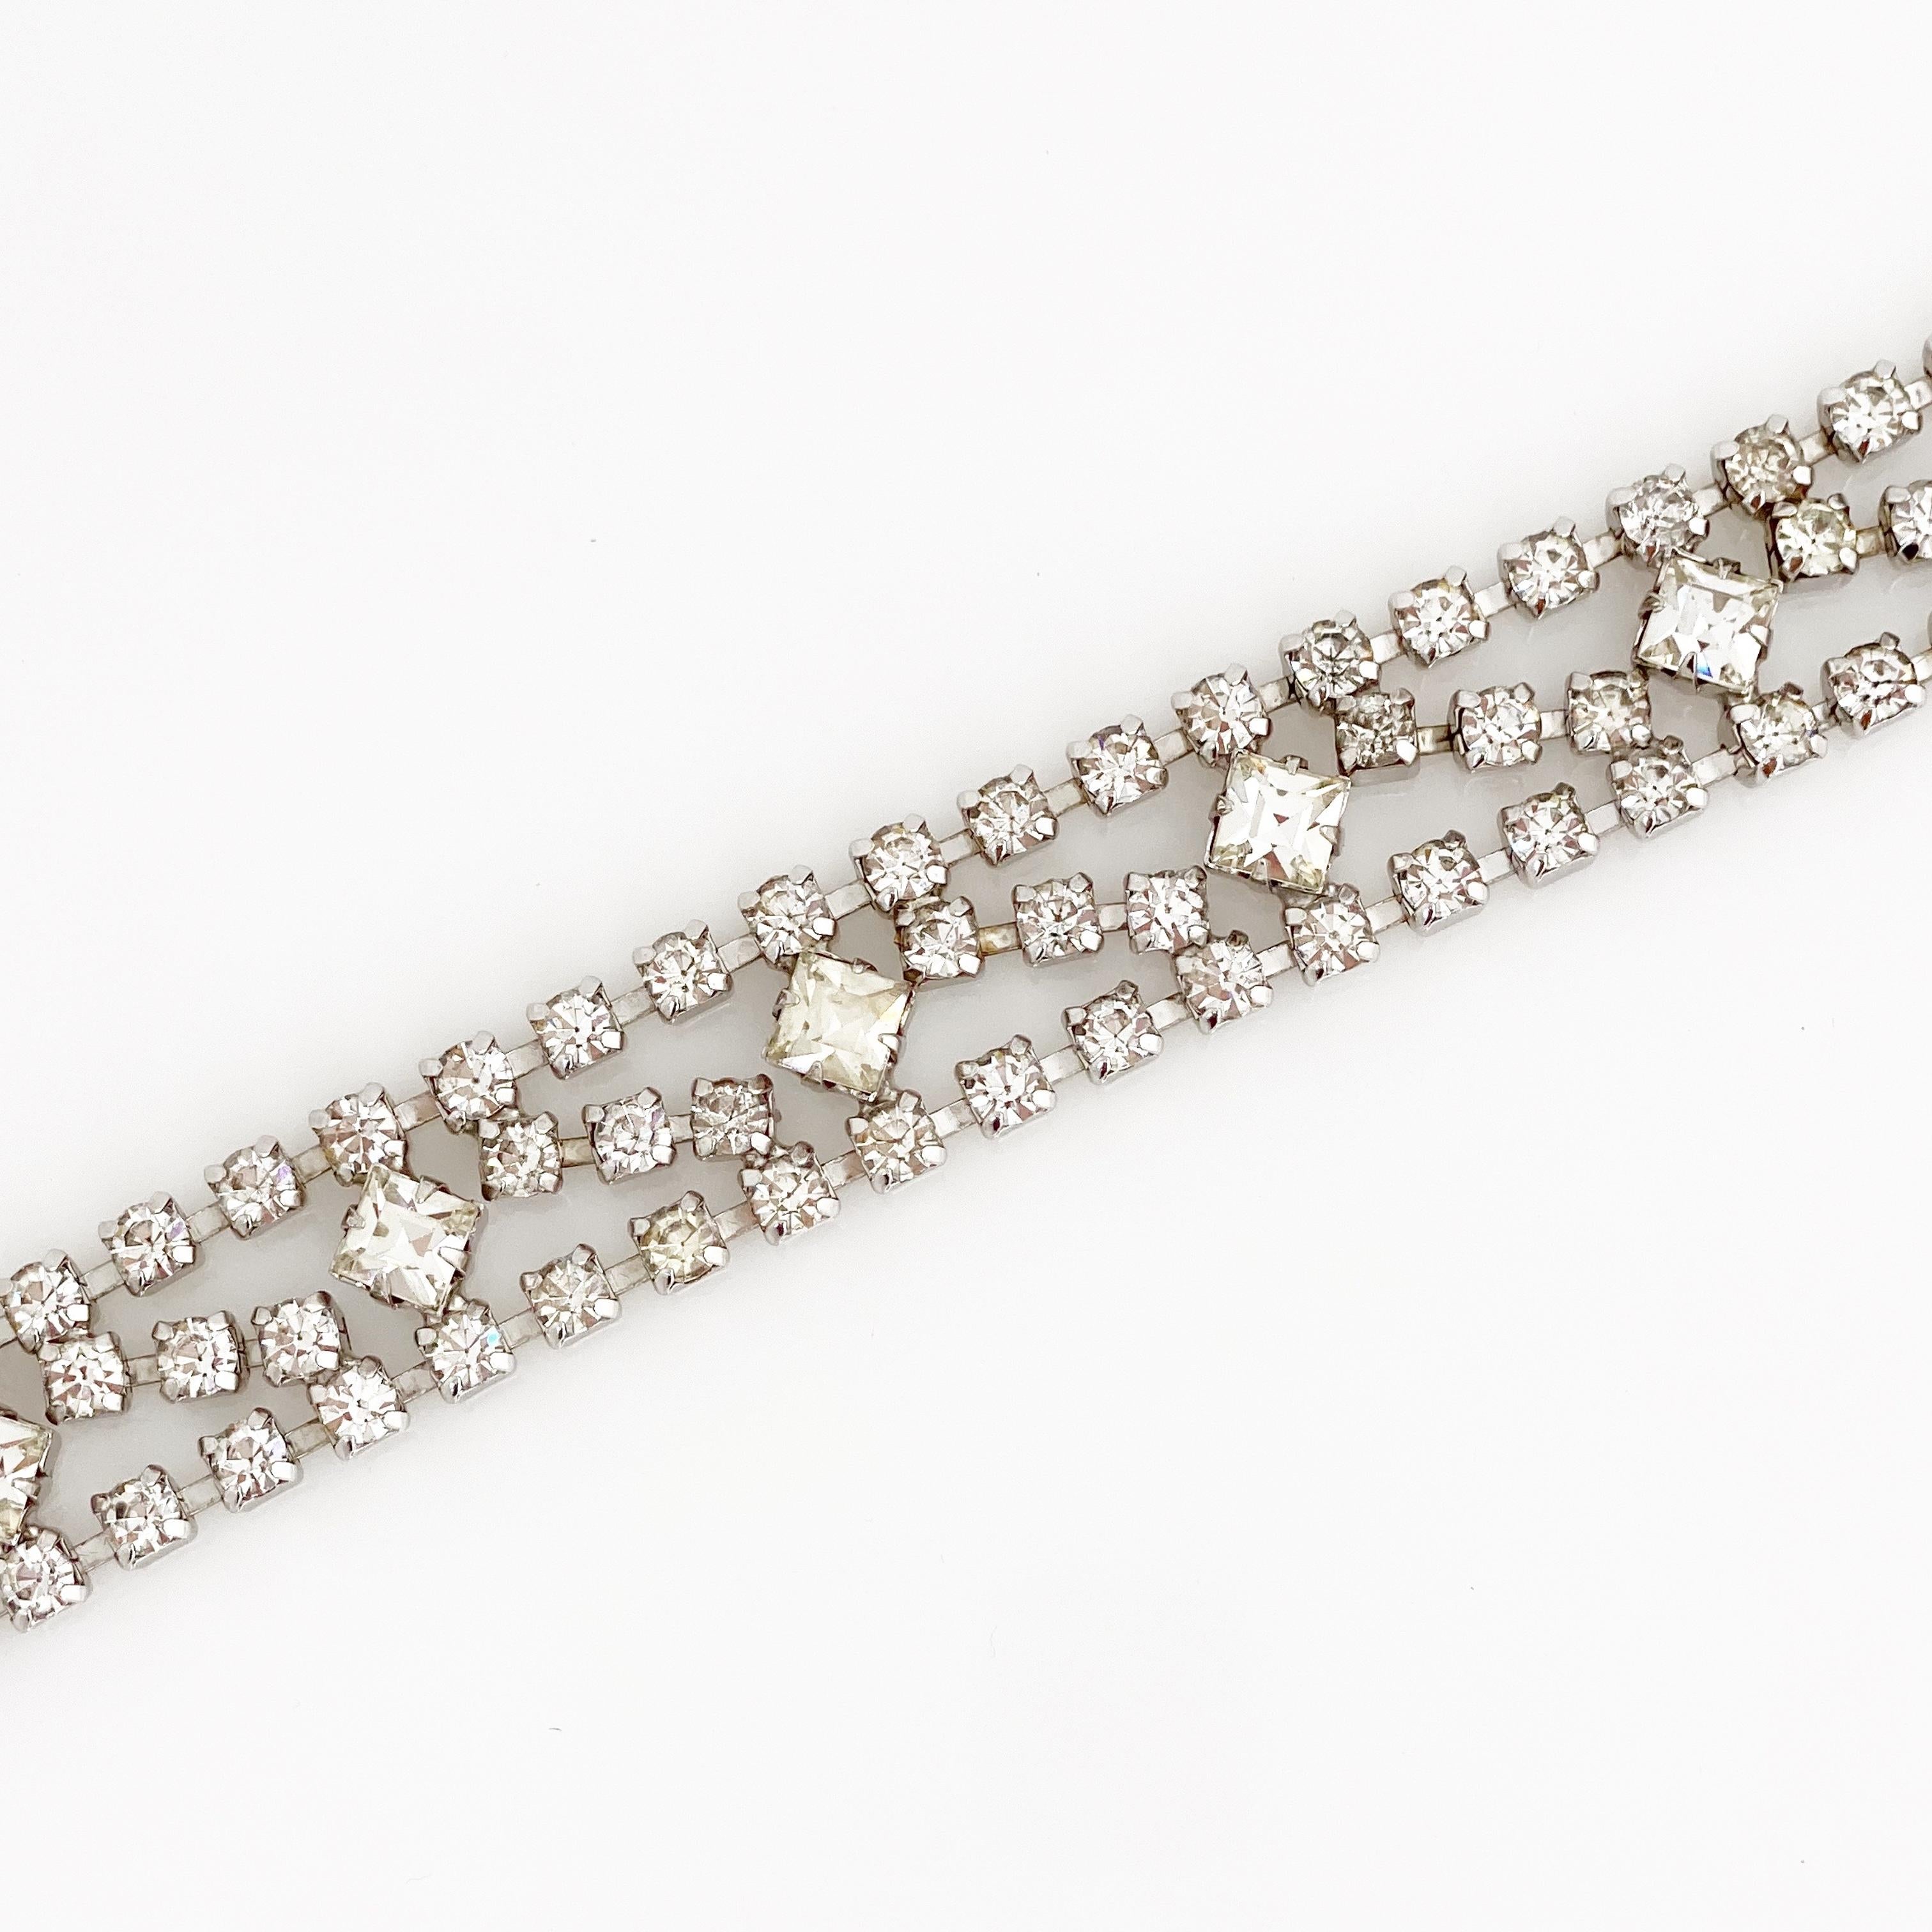 Square Cut Crystal Rhinestone Cocktail Bracelet By Warner, 1950s In Good Condition For Sale In McKinney, TX